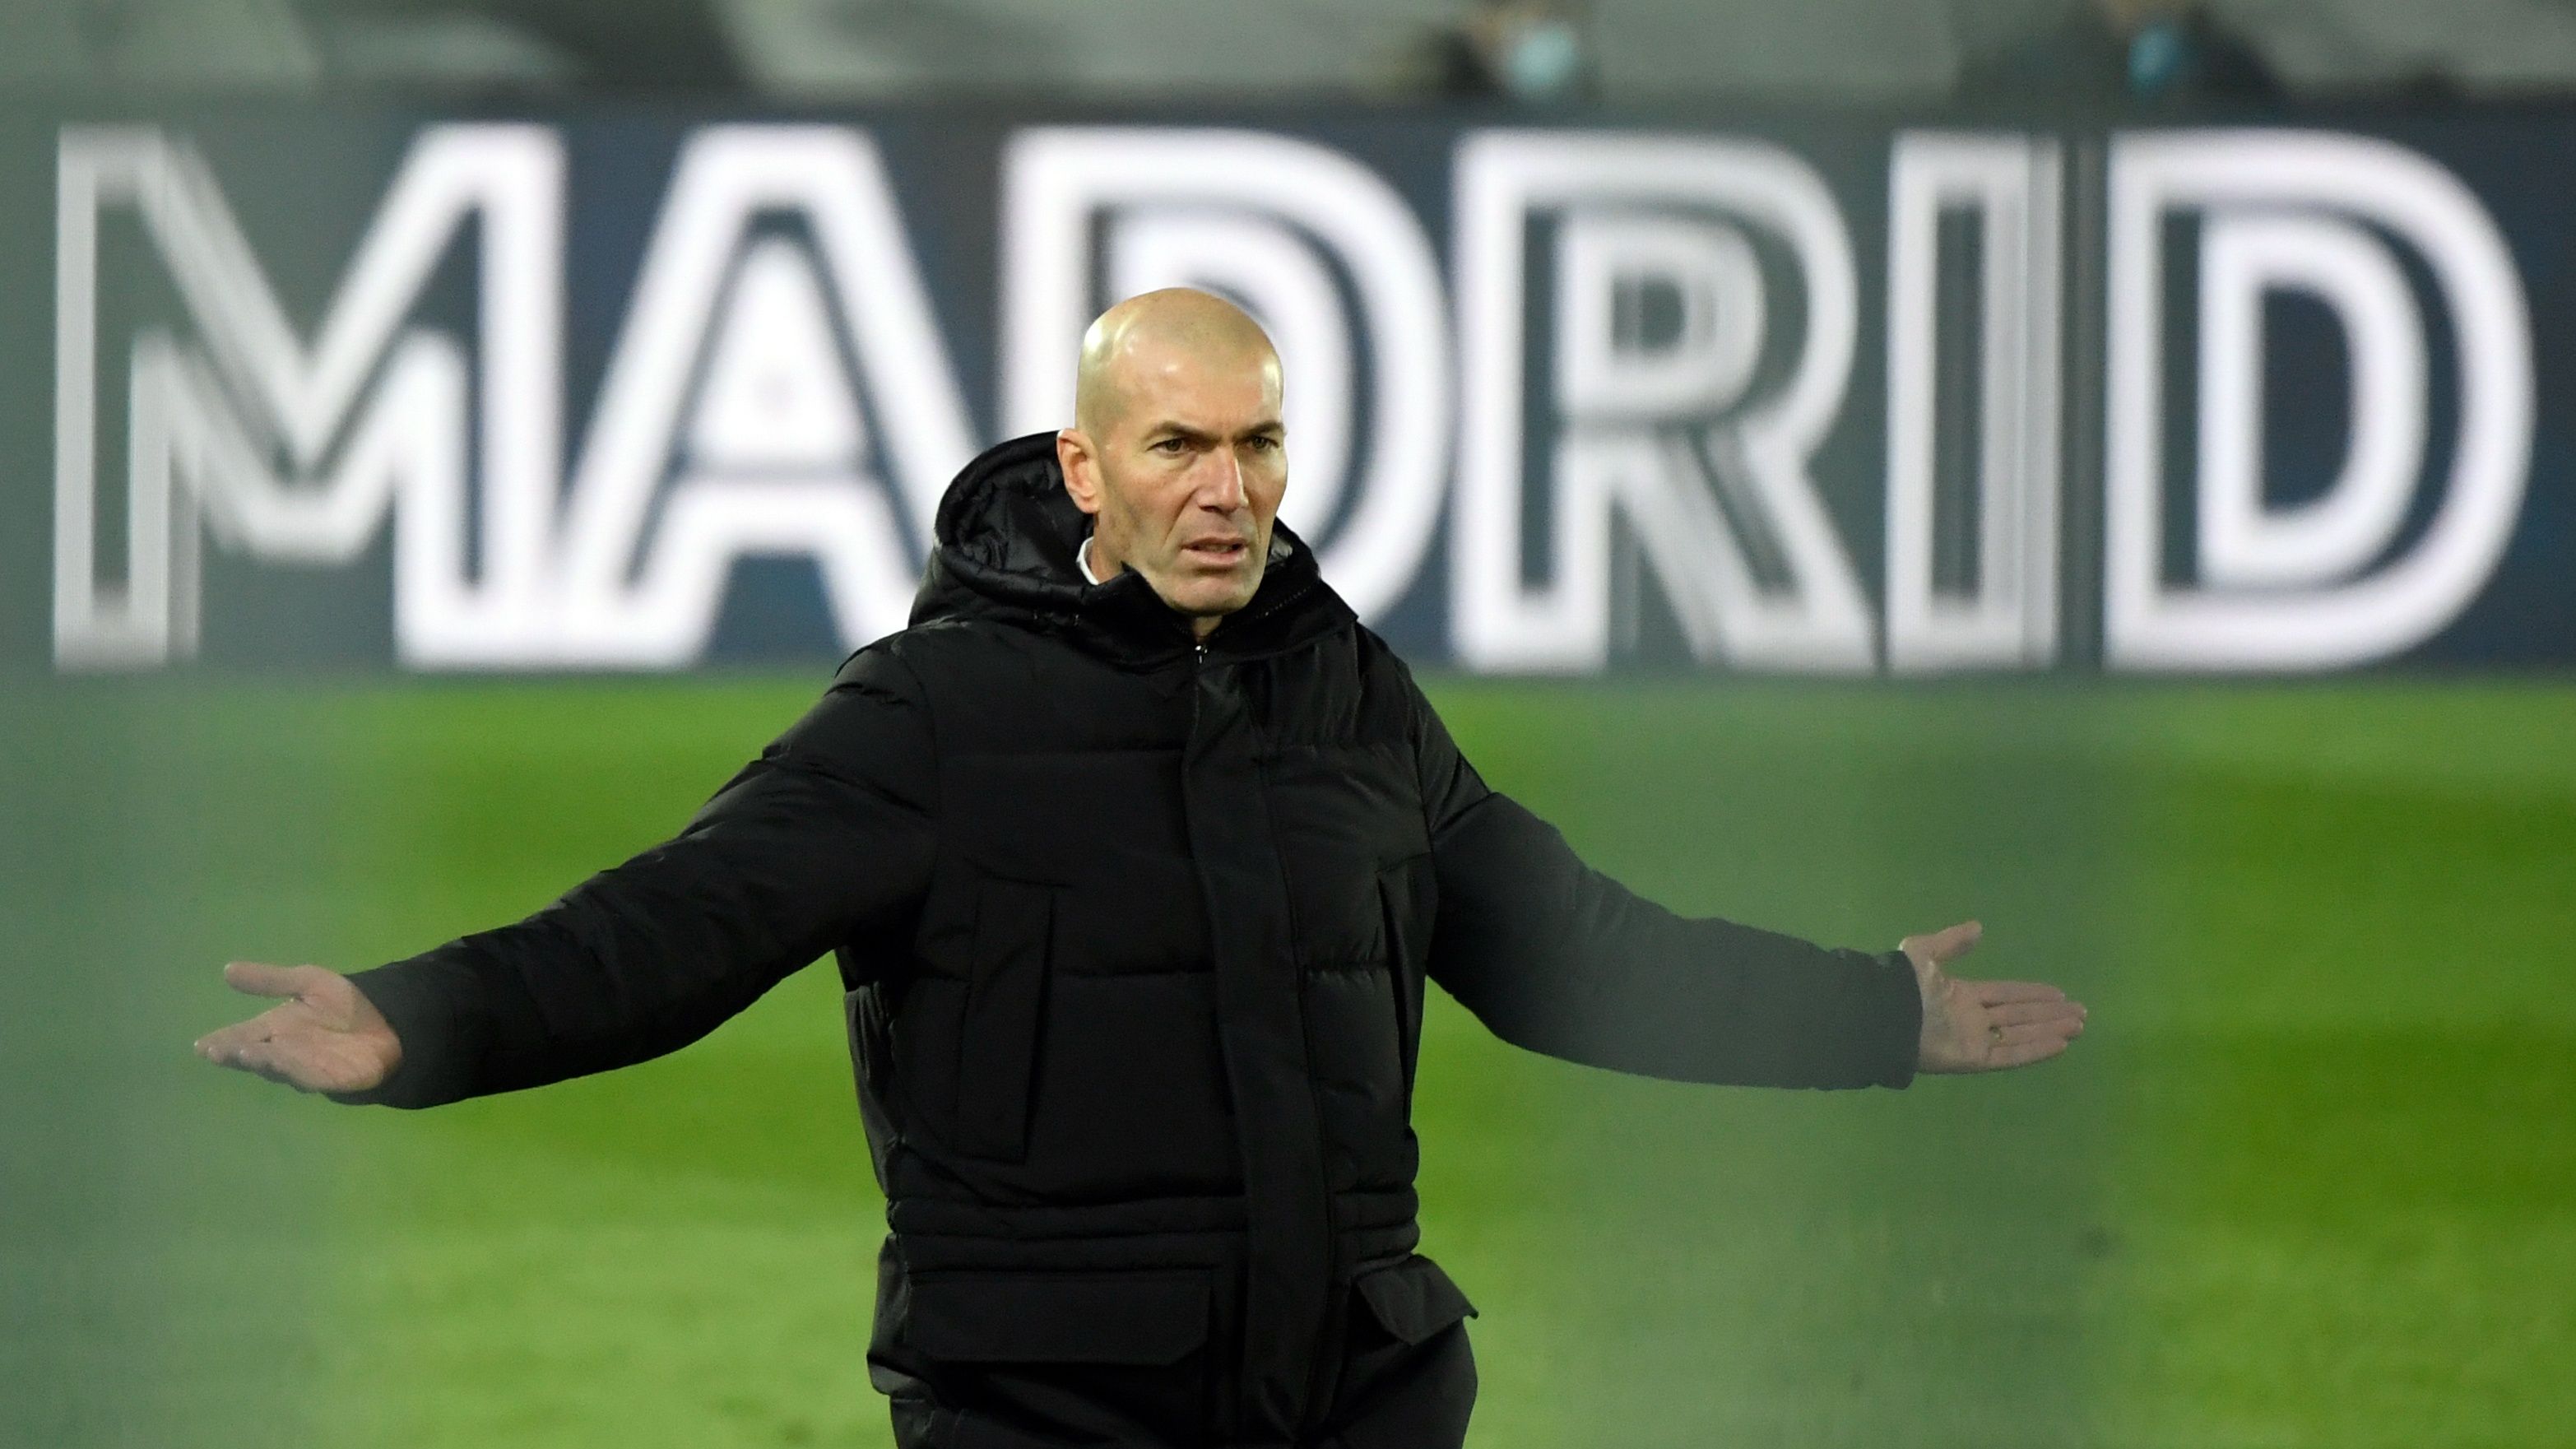 'The referee does his job and we try to do ours' - Zidane on latest Real Madrid penalty controversy